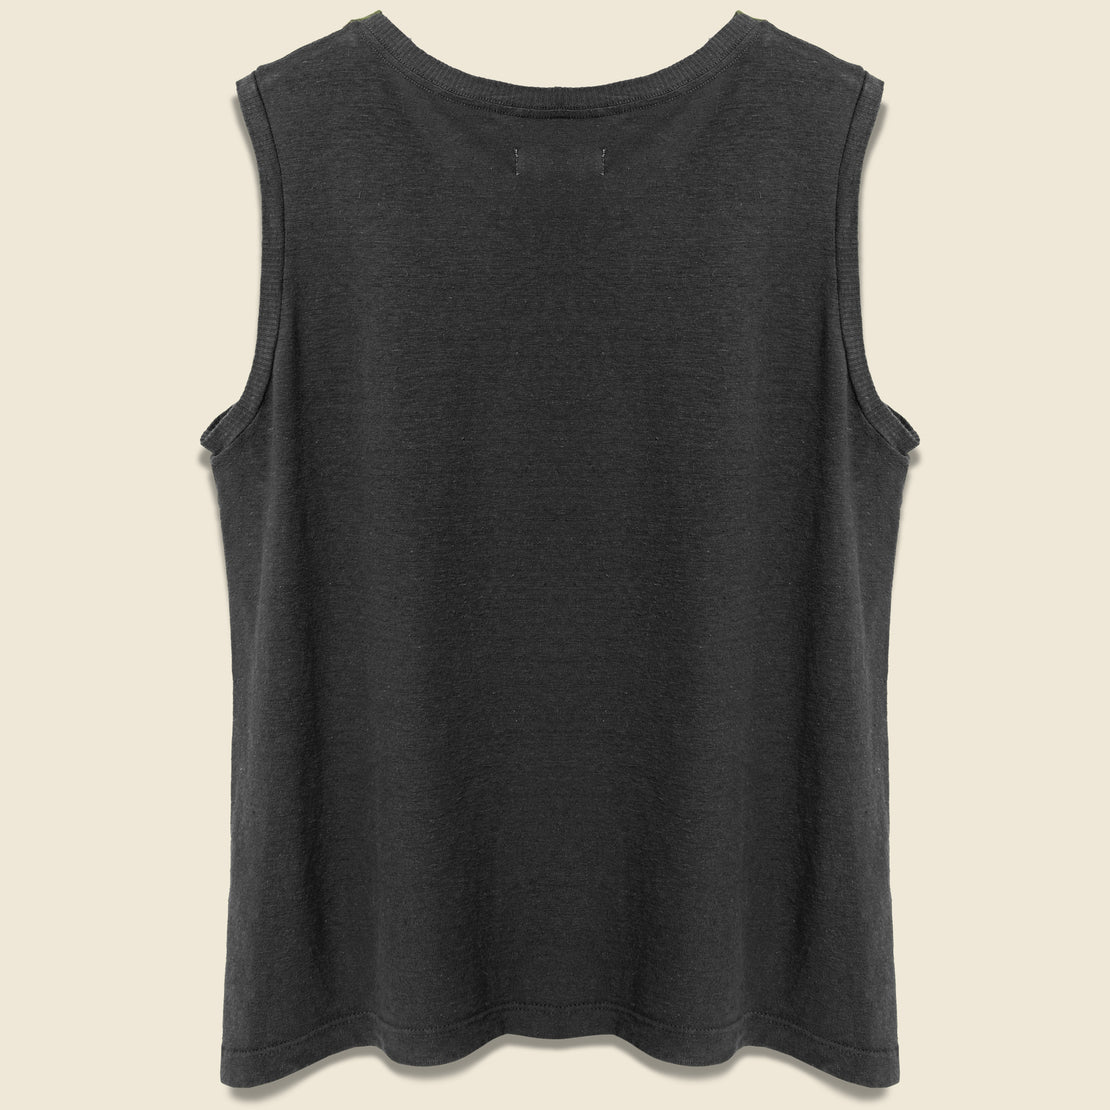 Cotton/Linen Muscle Tee - Black - Imogene + Willie - STAG Provisions - W - Tops - Sleeveless